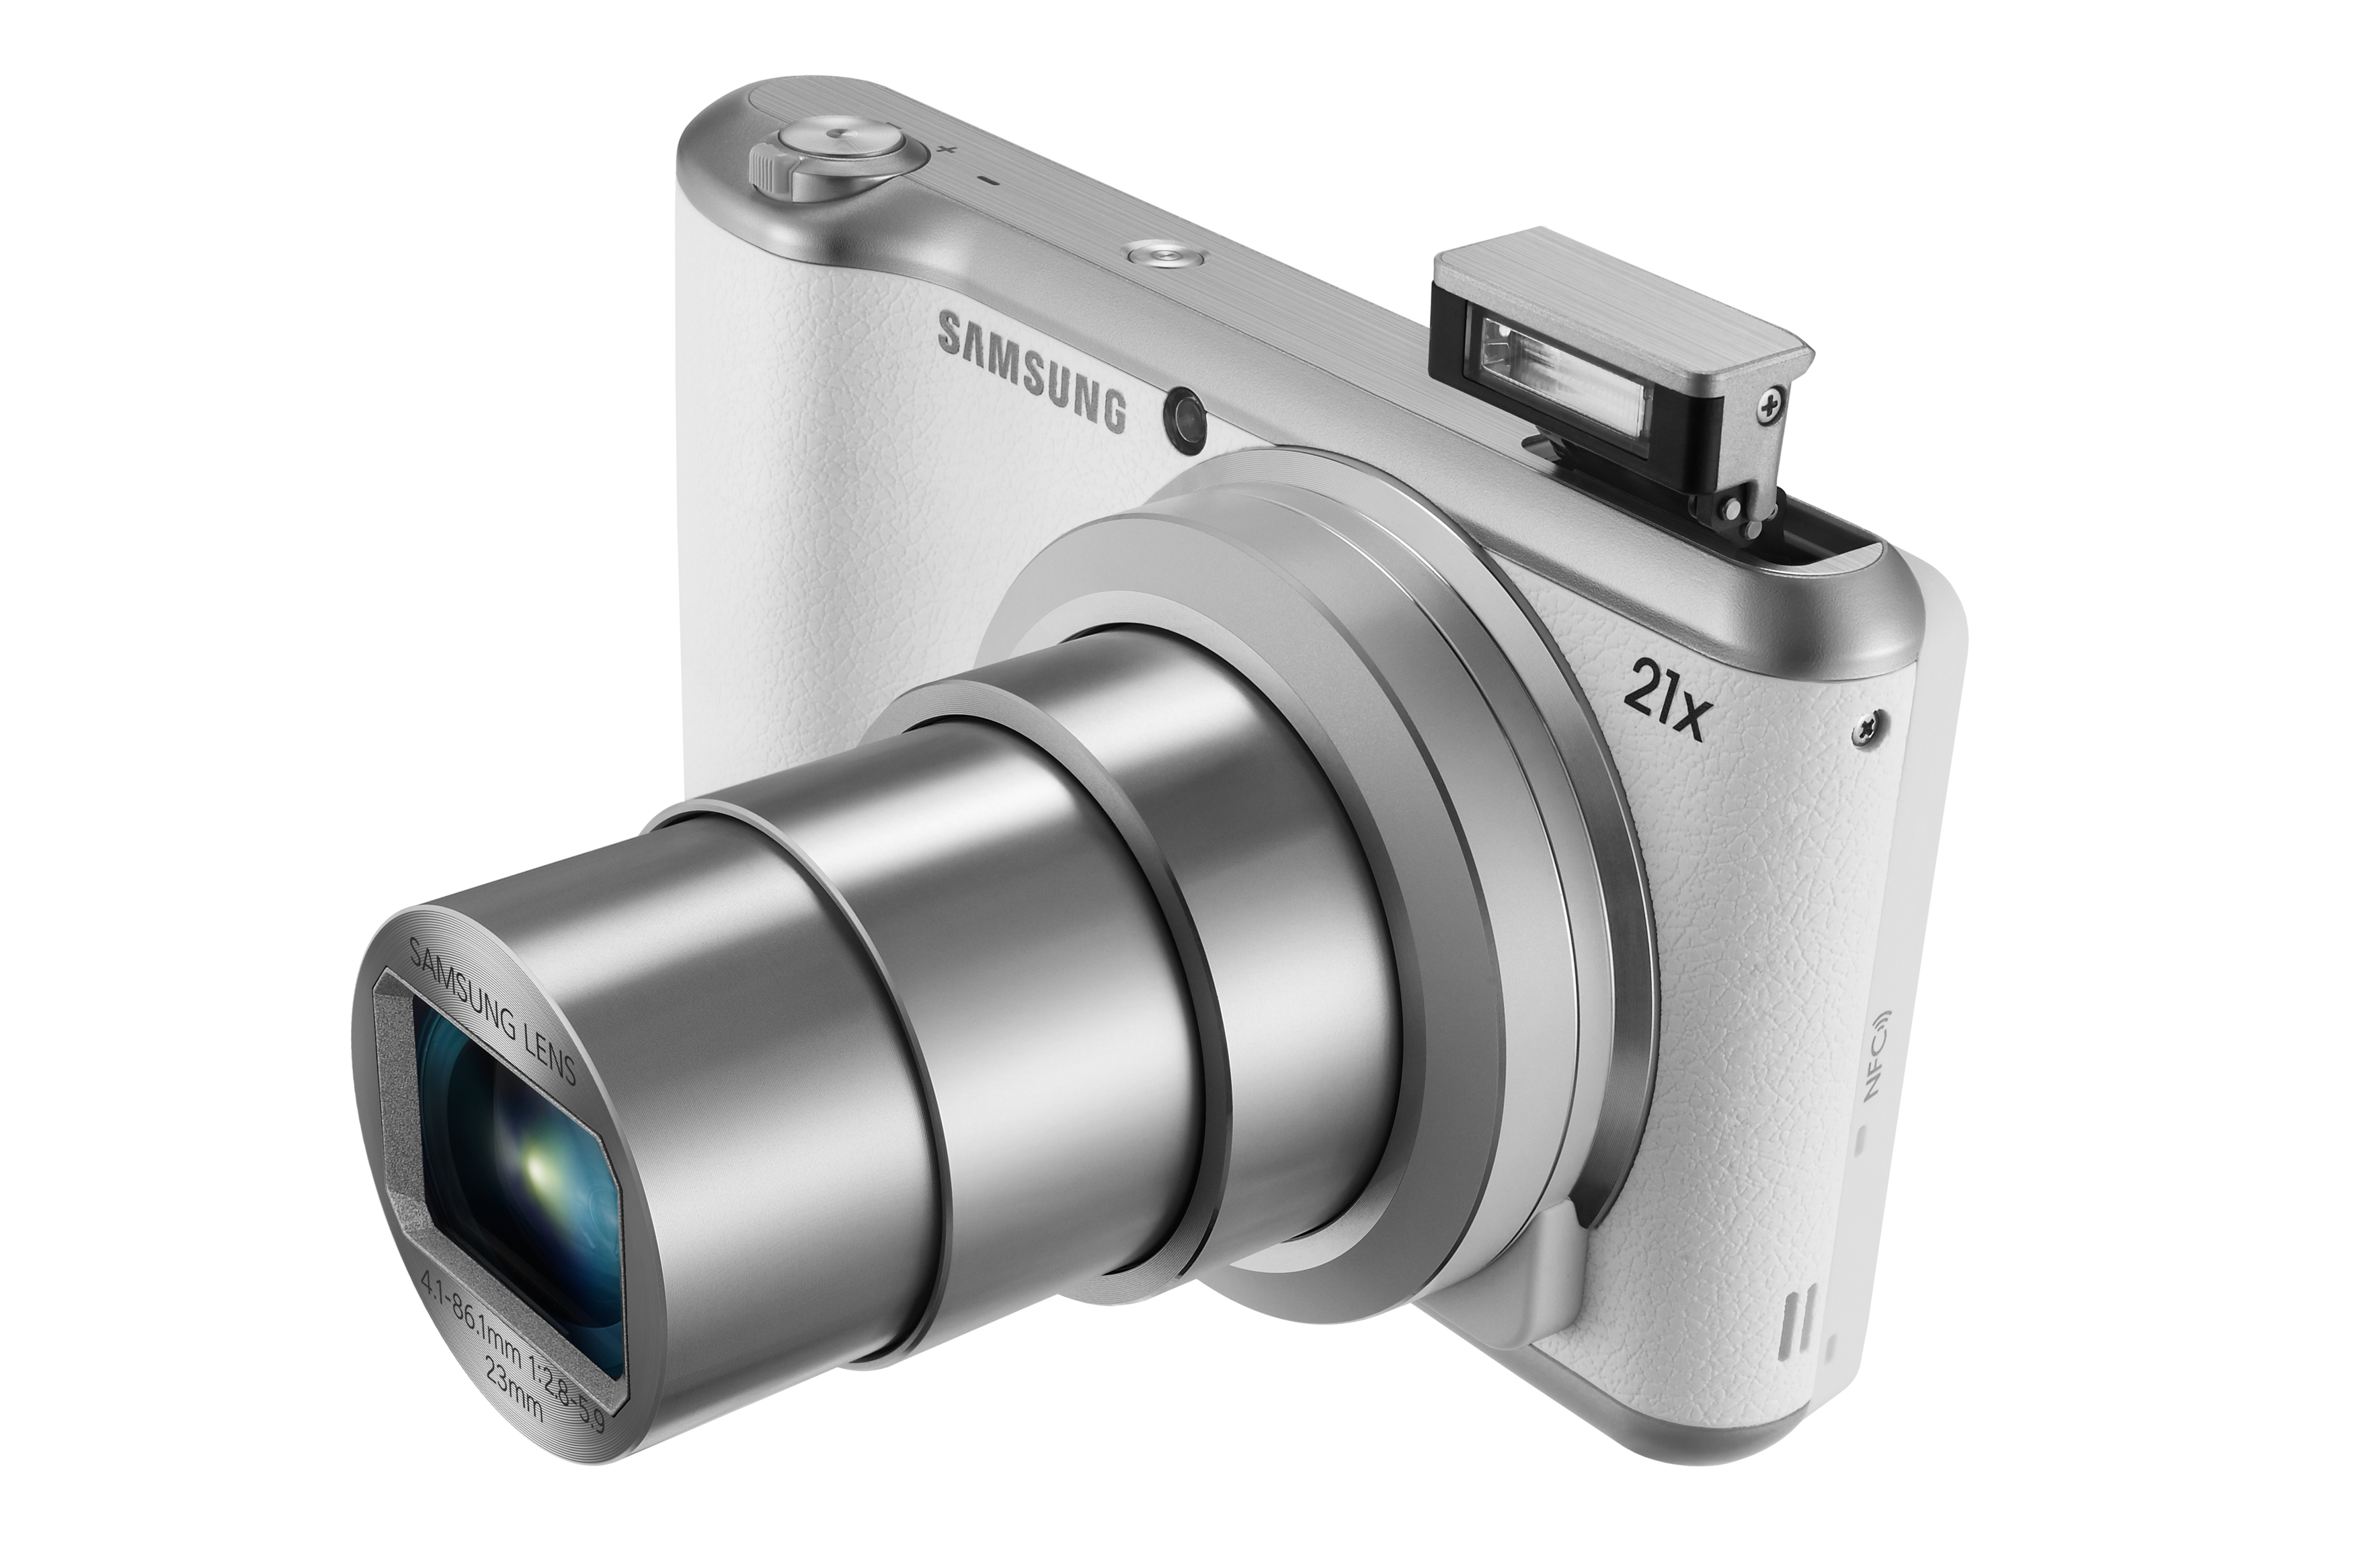 Samsung unveils Galaxy Camera 2, Android powered Point and Shoot Super